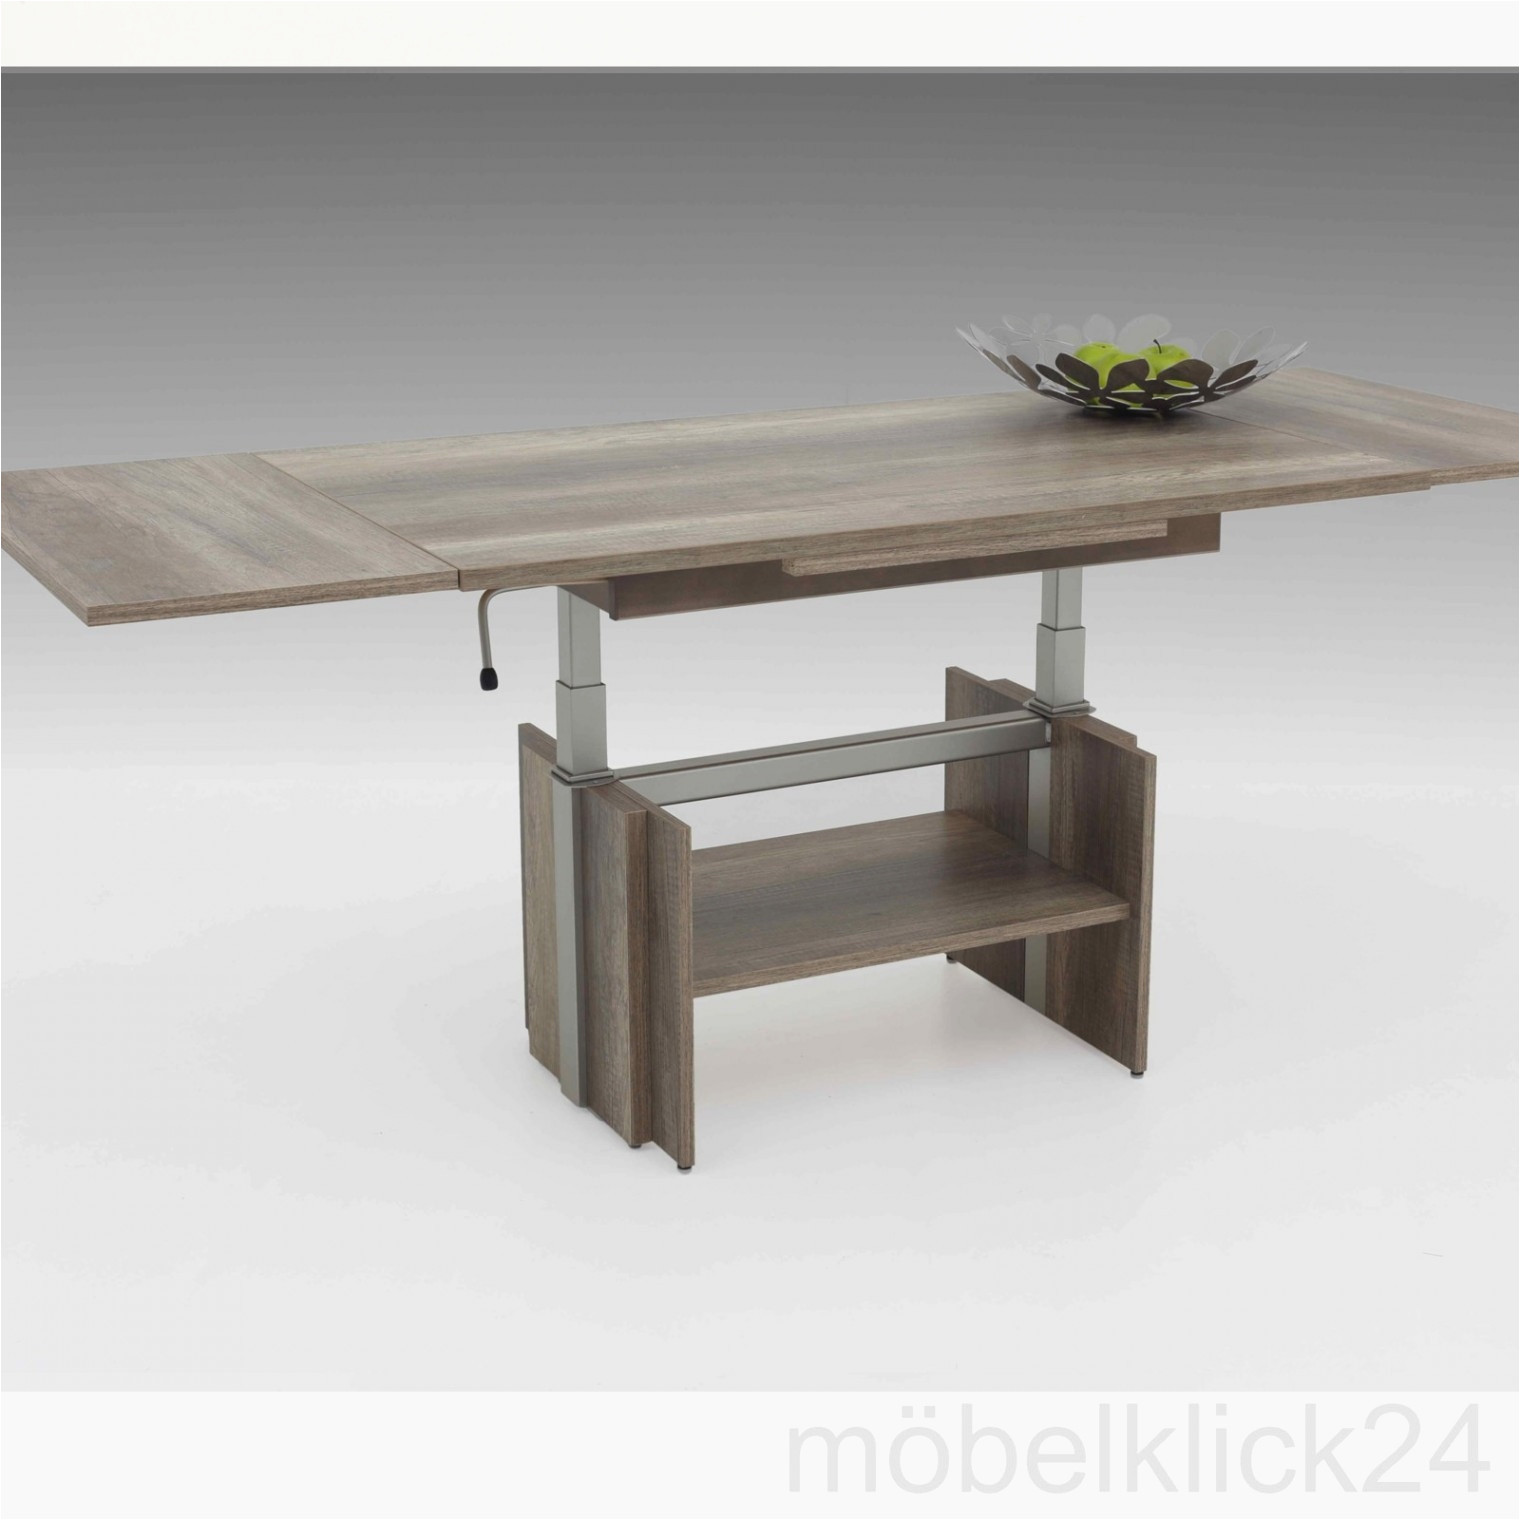 coffee table glass wood metal collection glass rectangle coffee table new home design trendy kaffetisch